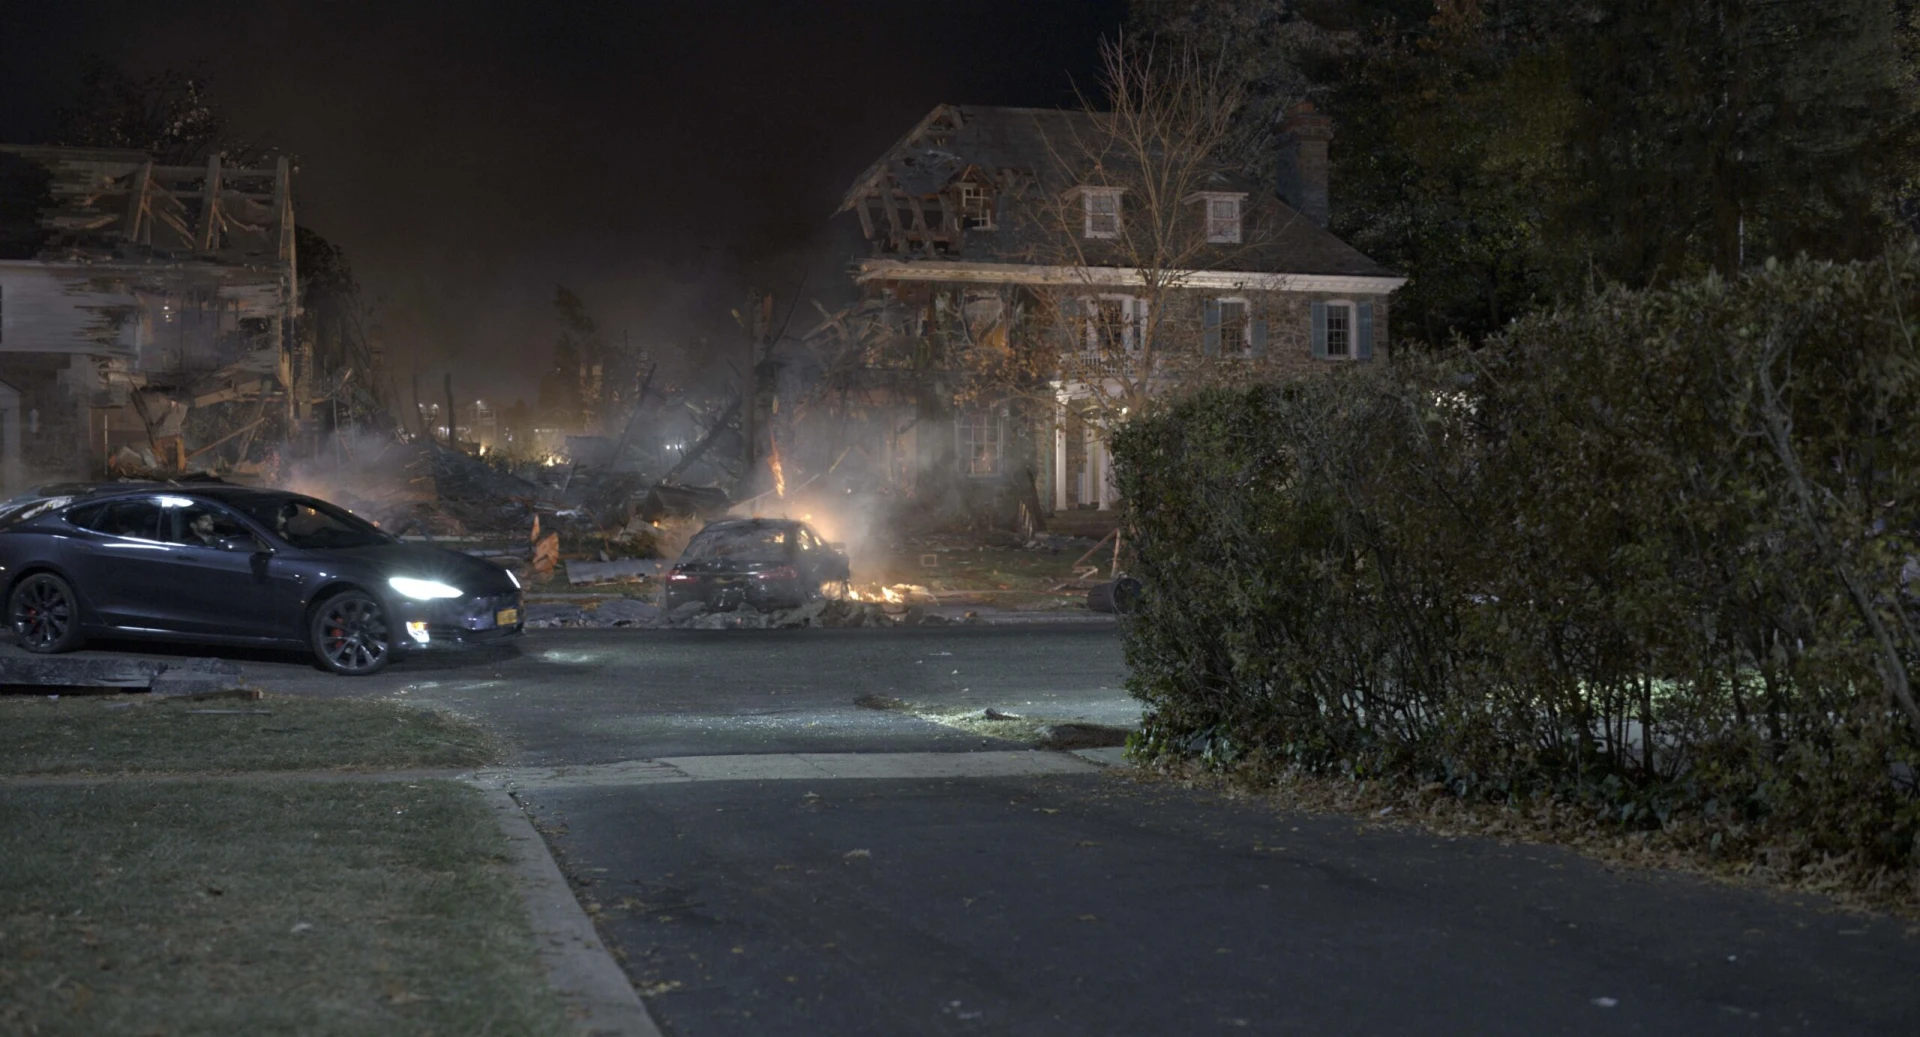 Invasion S01 shot collapsed house on fire from Raynault vfx